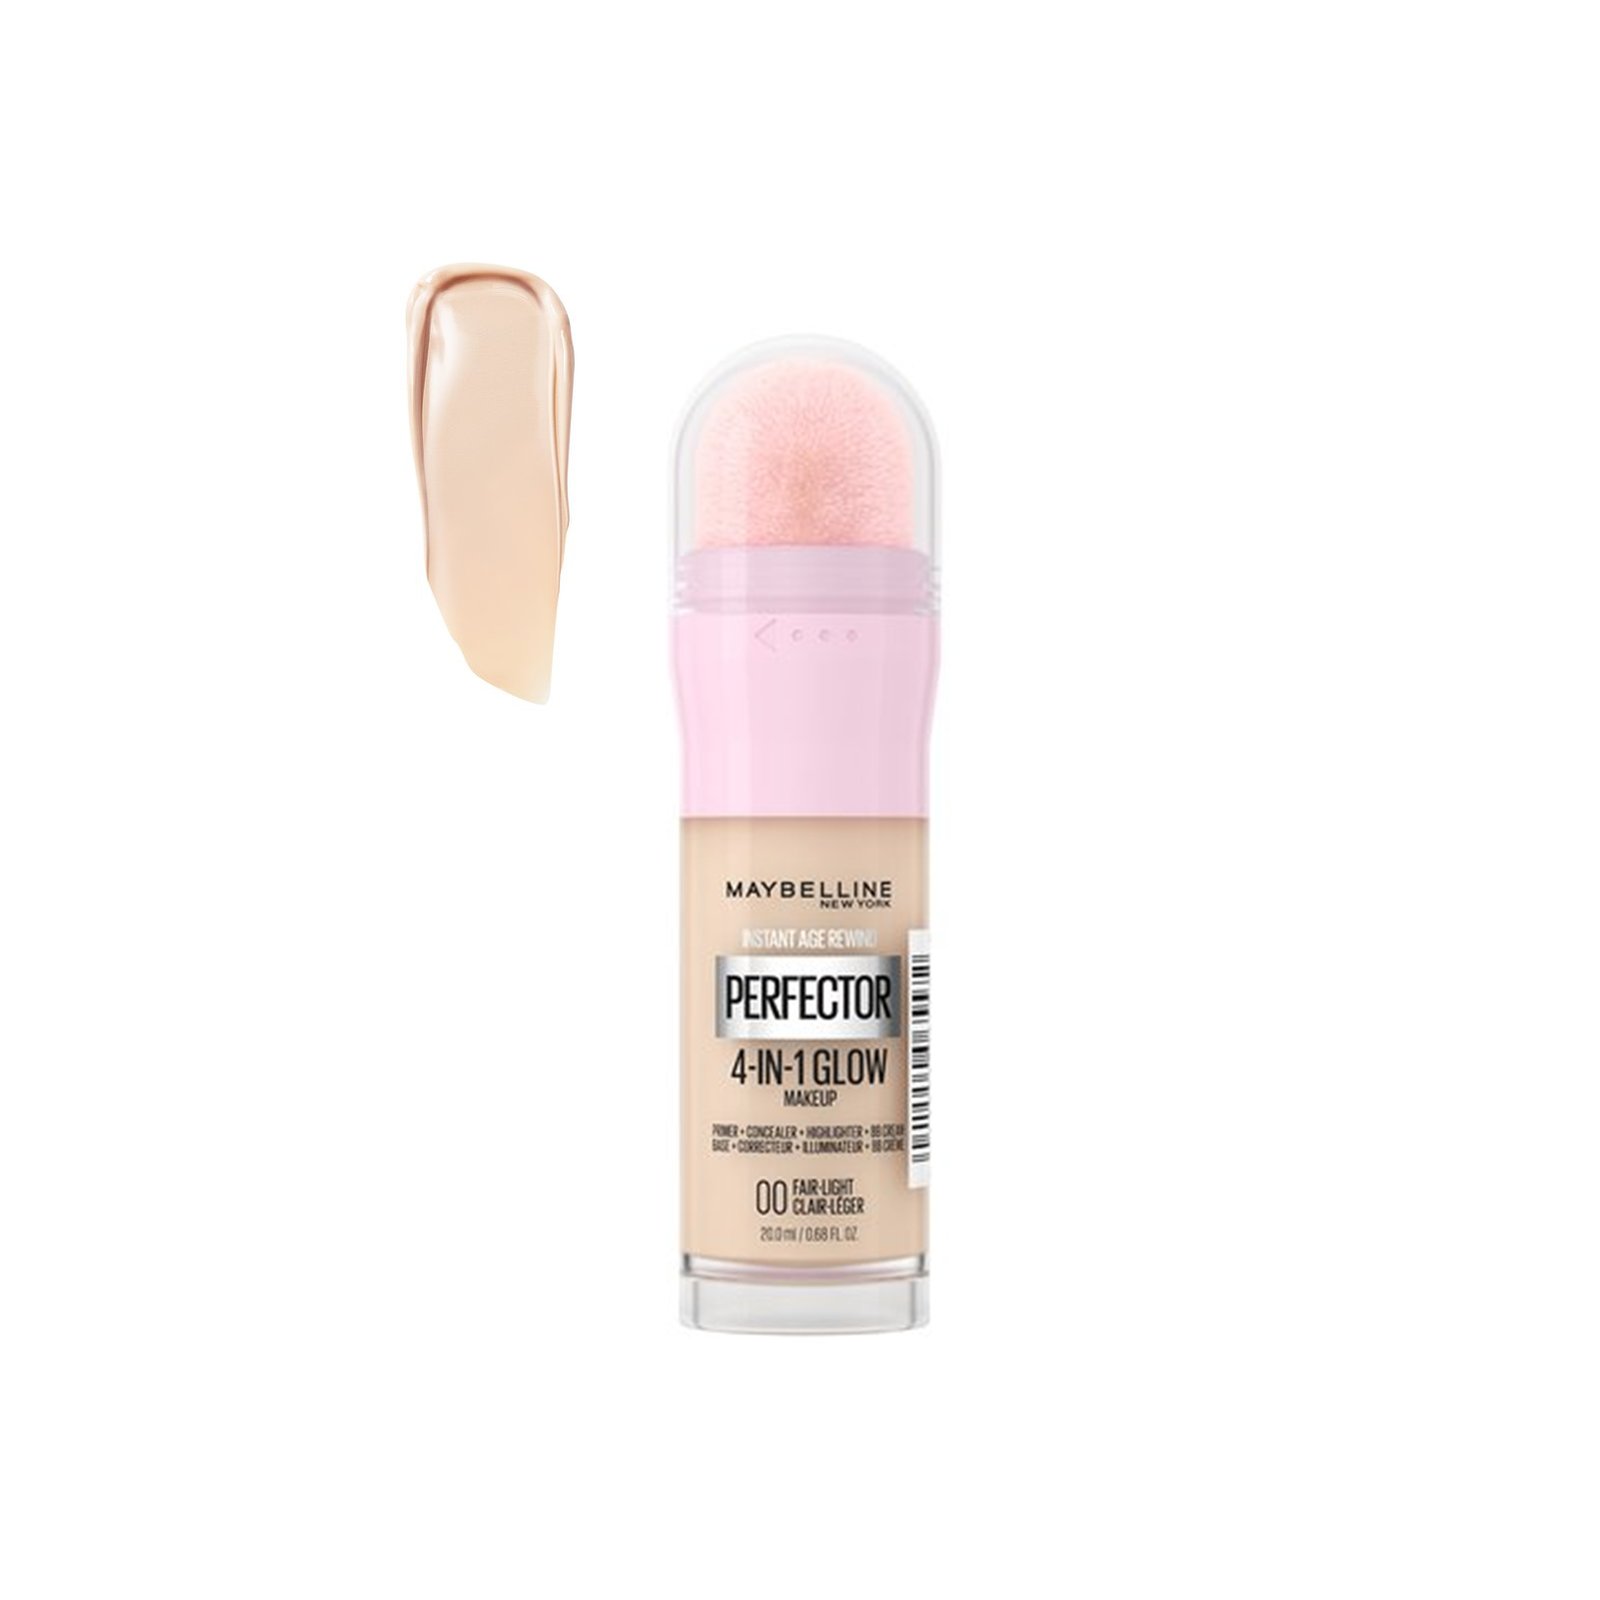 Maybelline Perfector 4-In-1 Glow Makeup